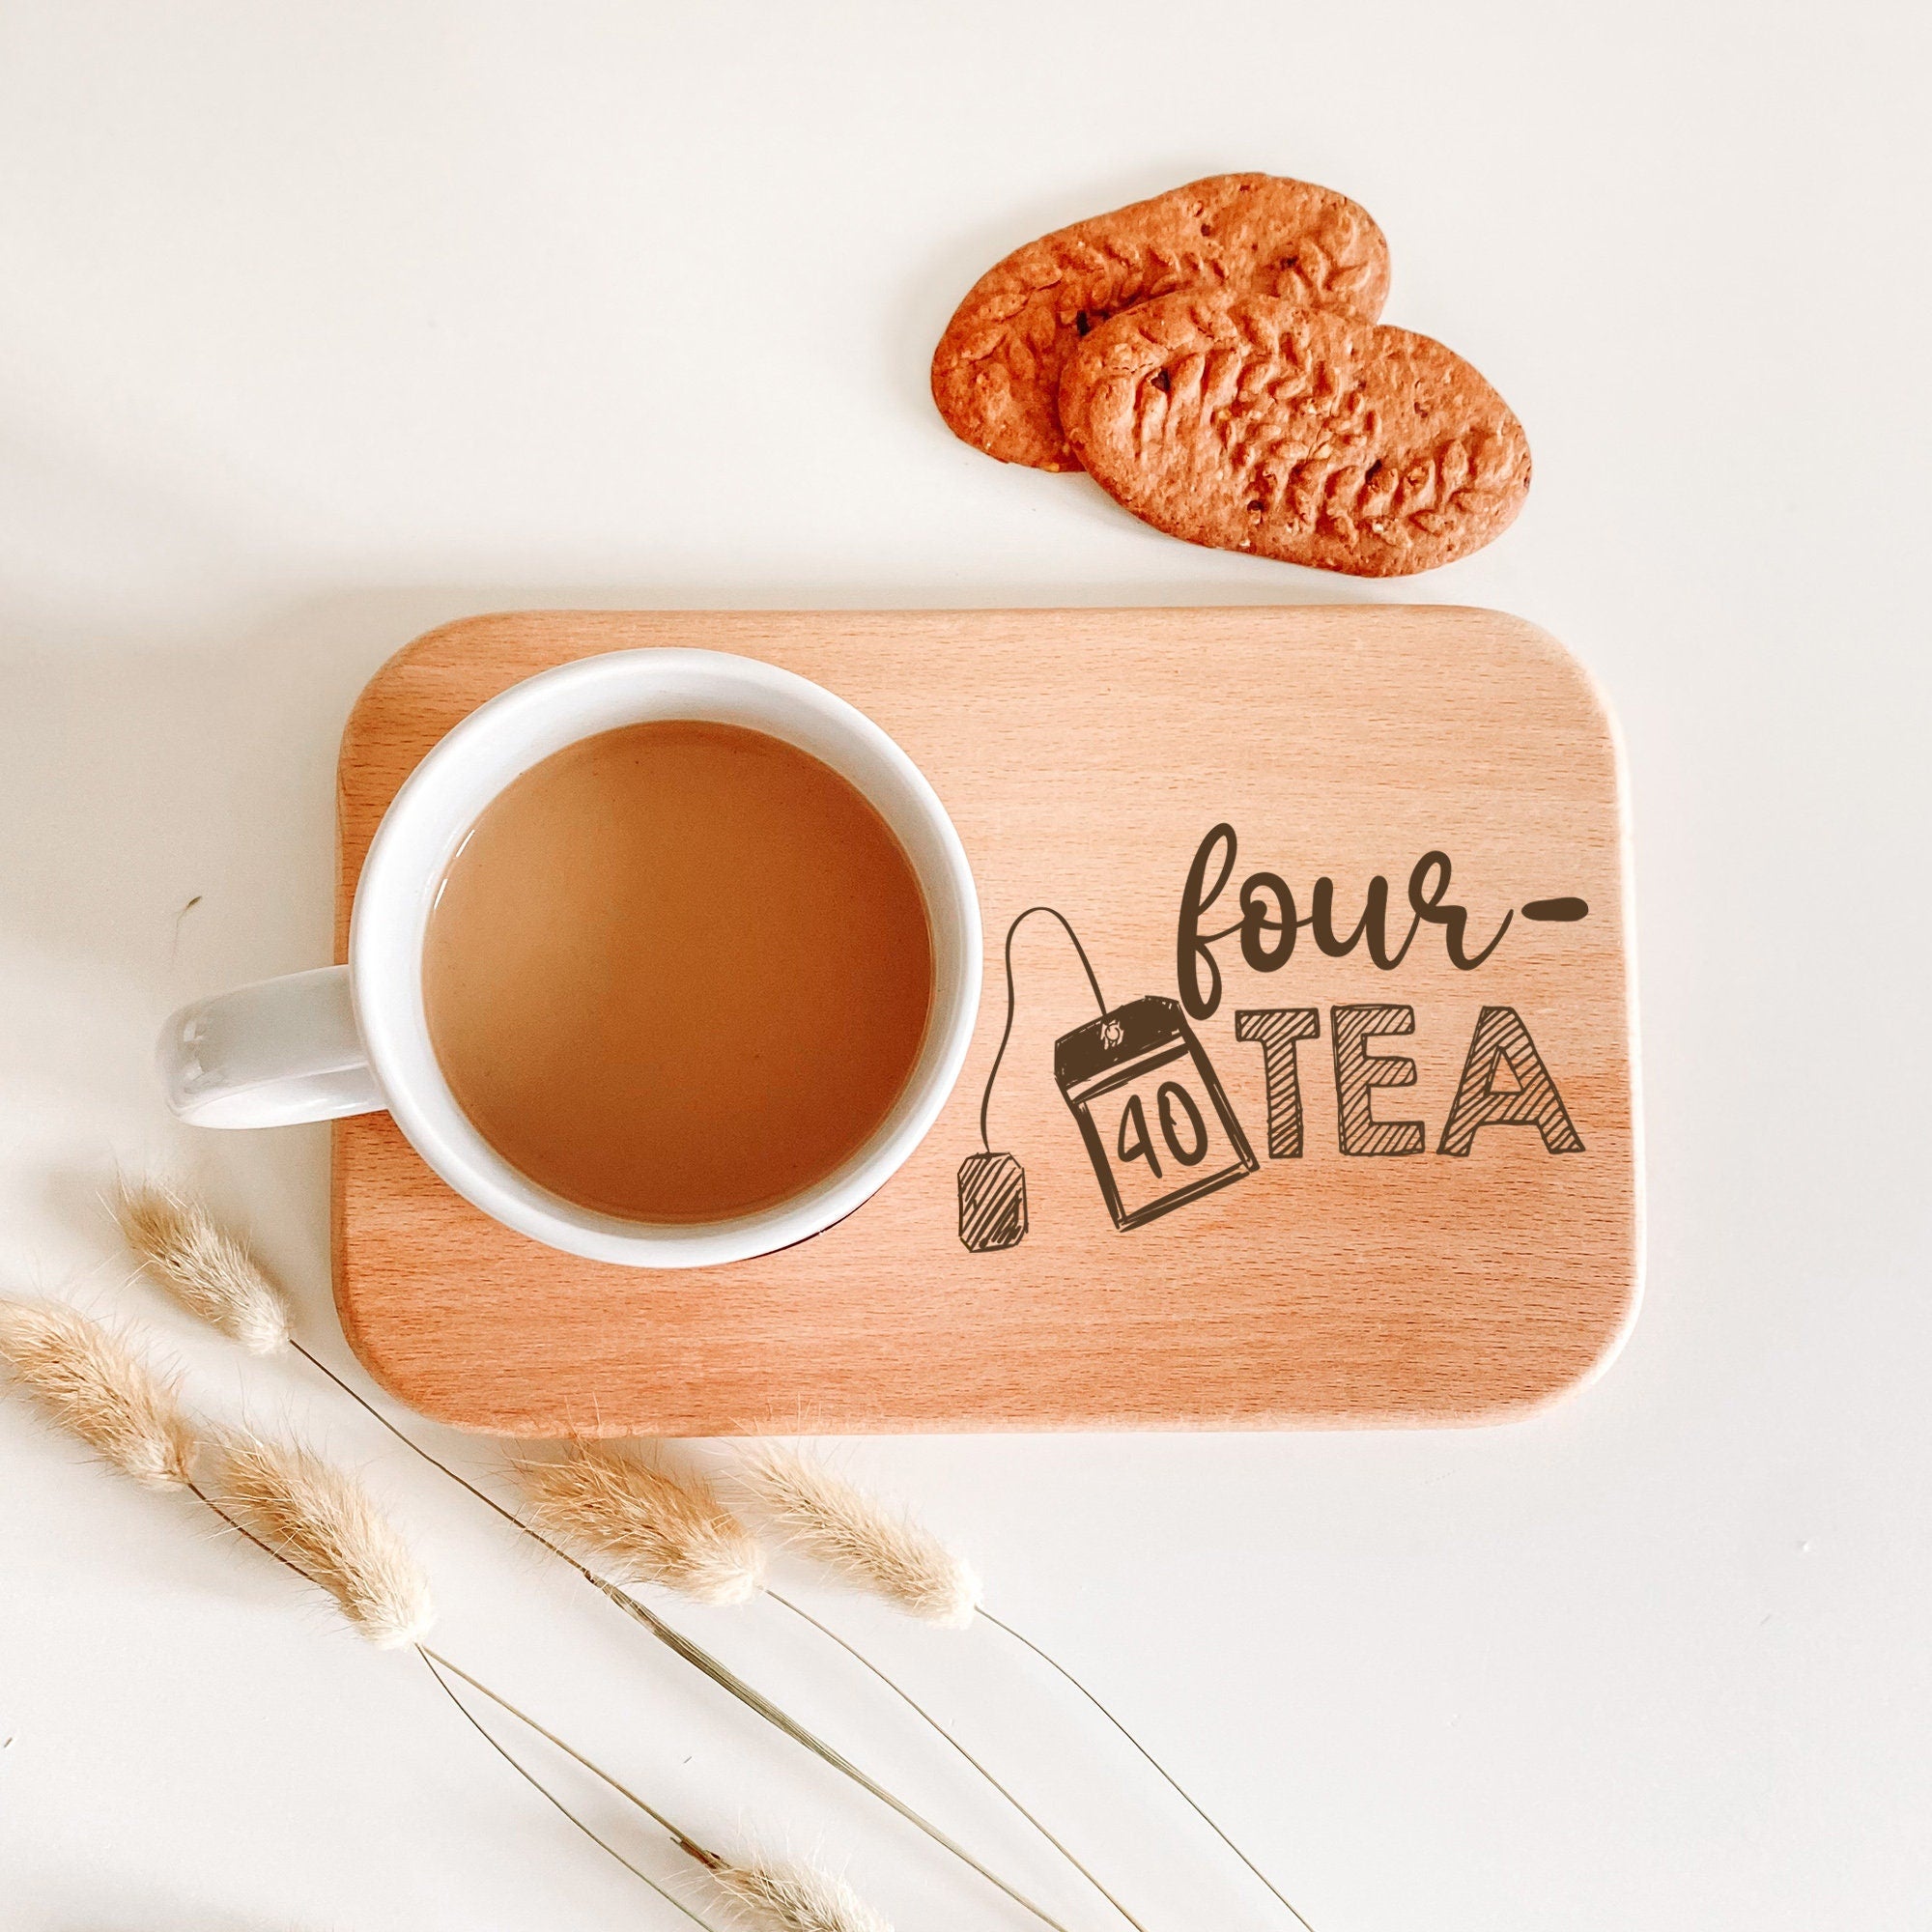 Personalised birthday engraved tea and treats board Funny tea lover birthday gift Gift